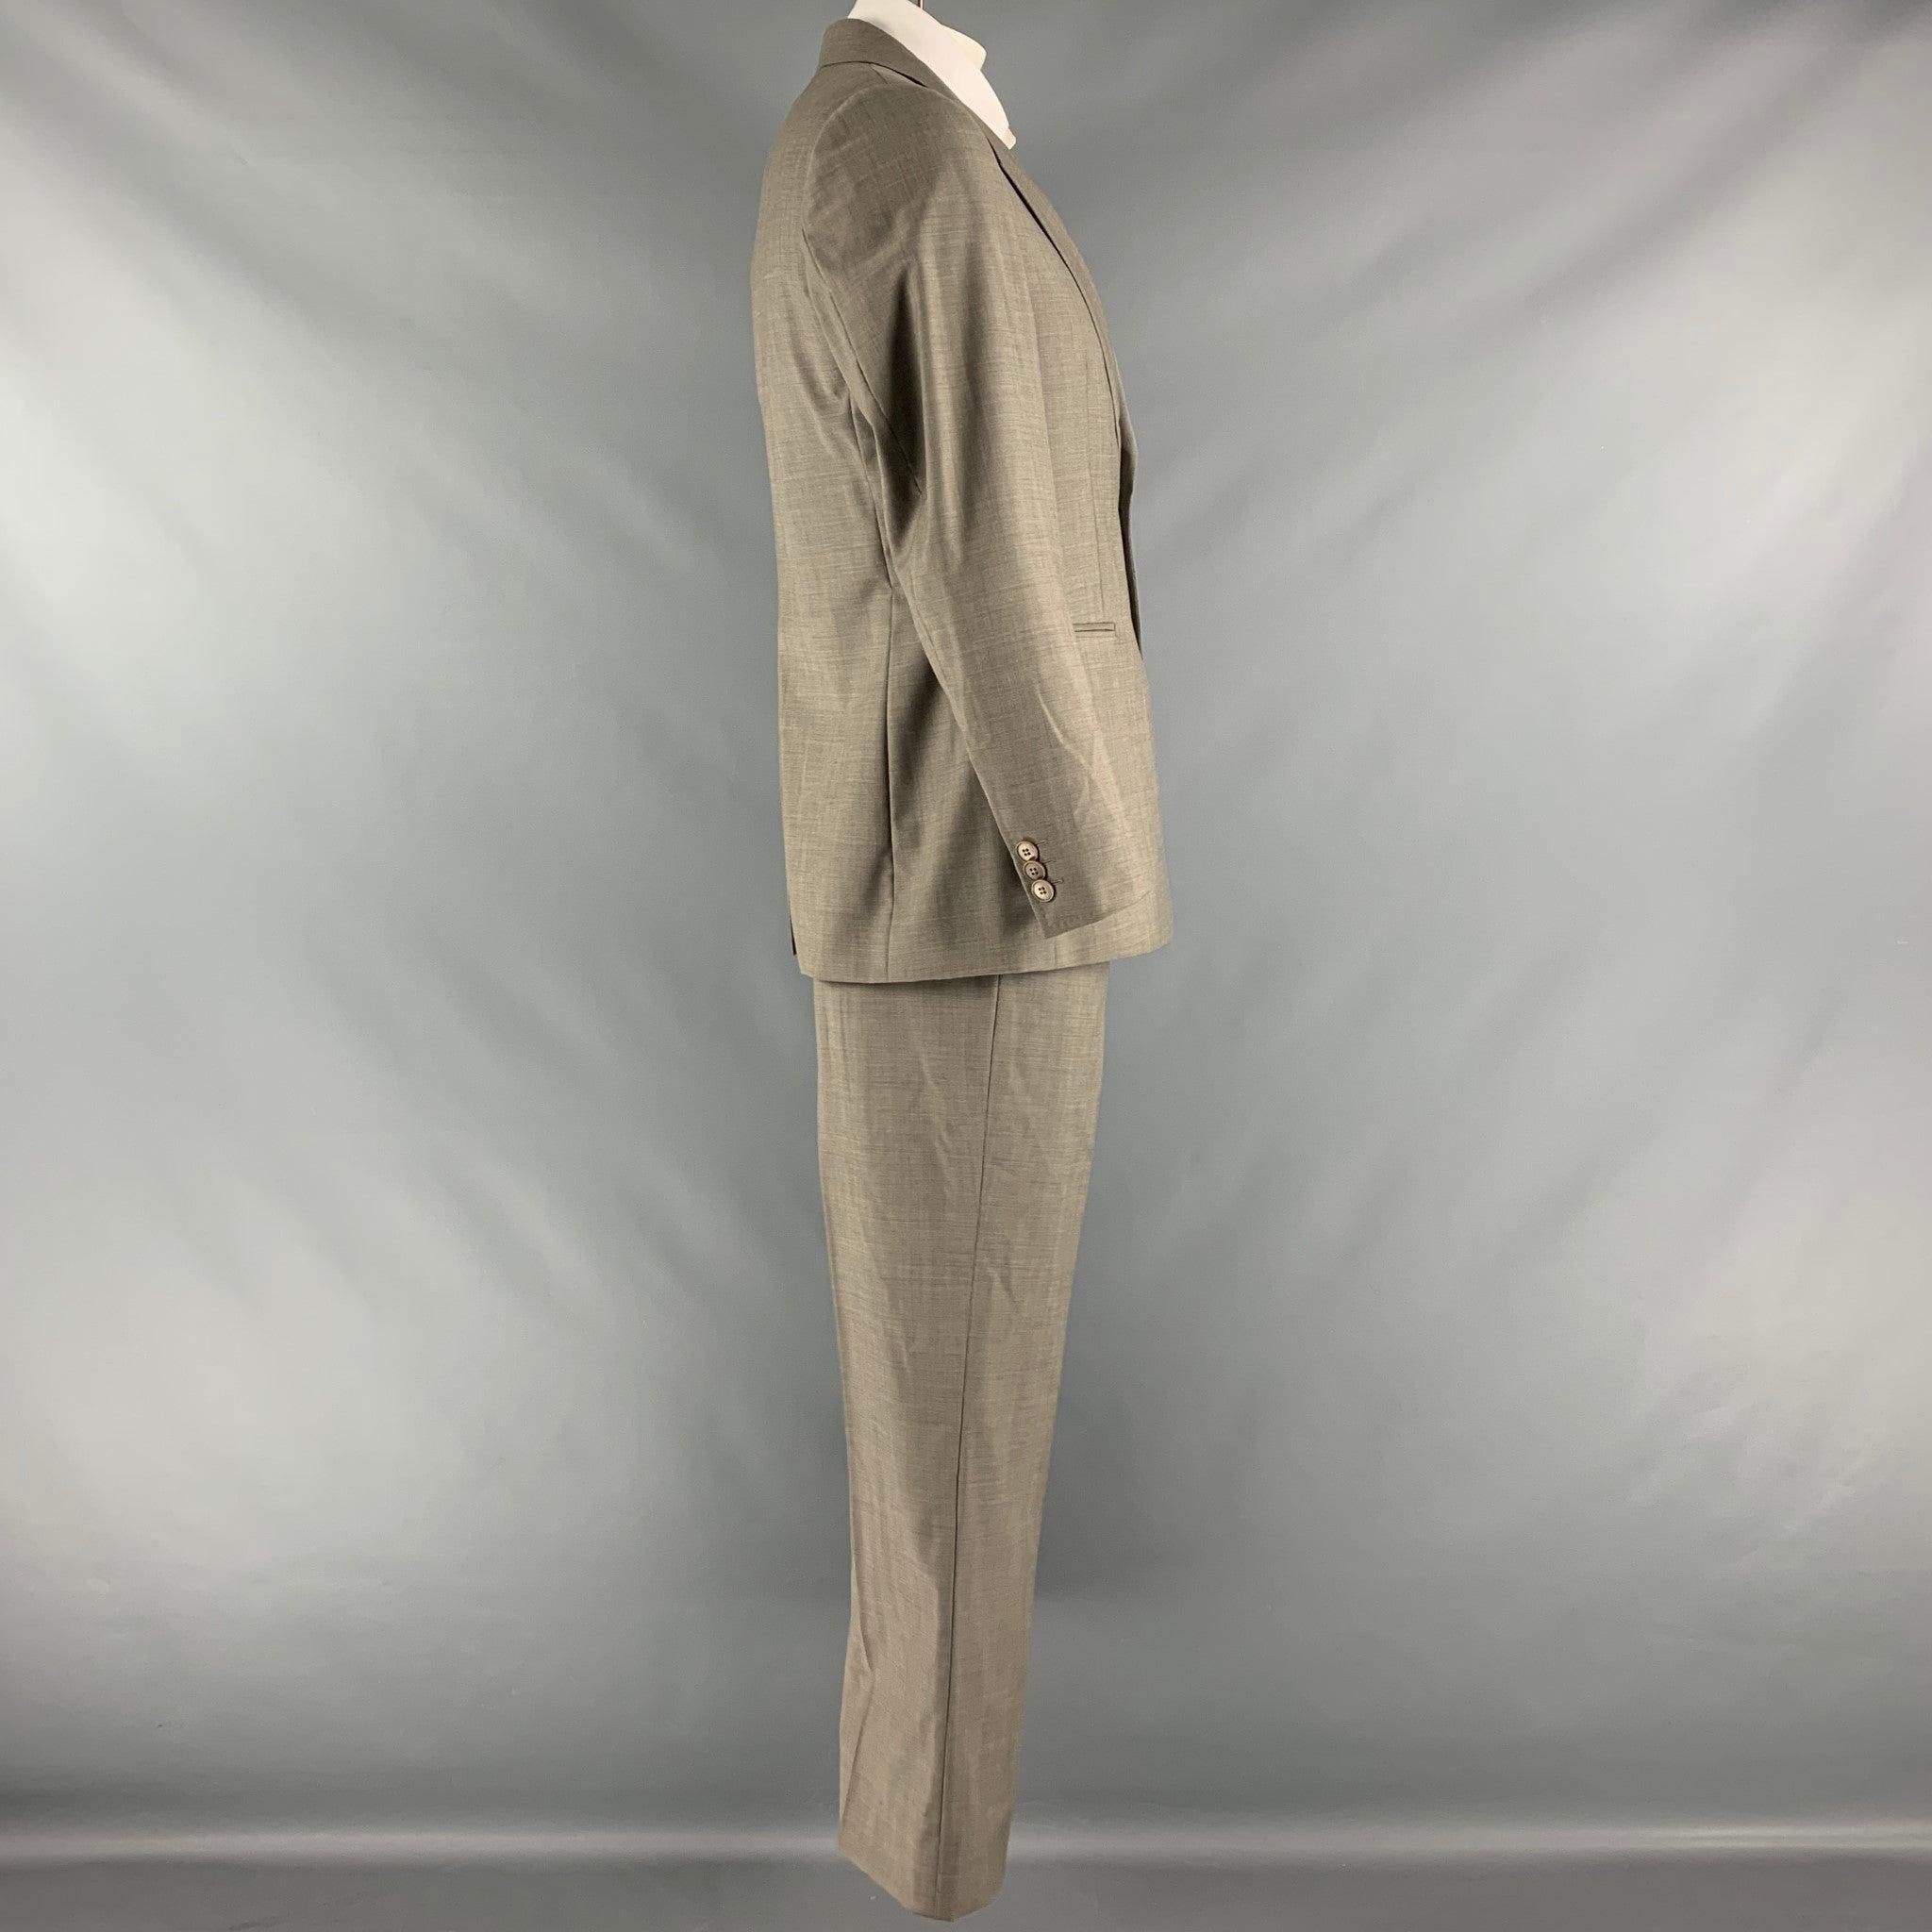 EMPORIO ARMANI Size 42 Taupe Solid Wool Notch Lapel Suit In Excellent Condition For Sale In San Francisco, CA